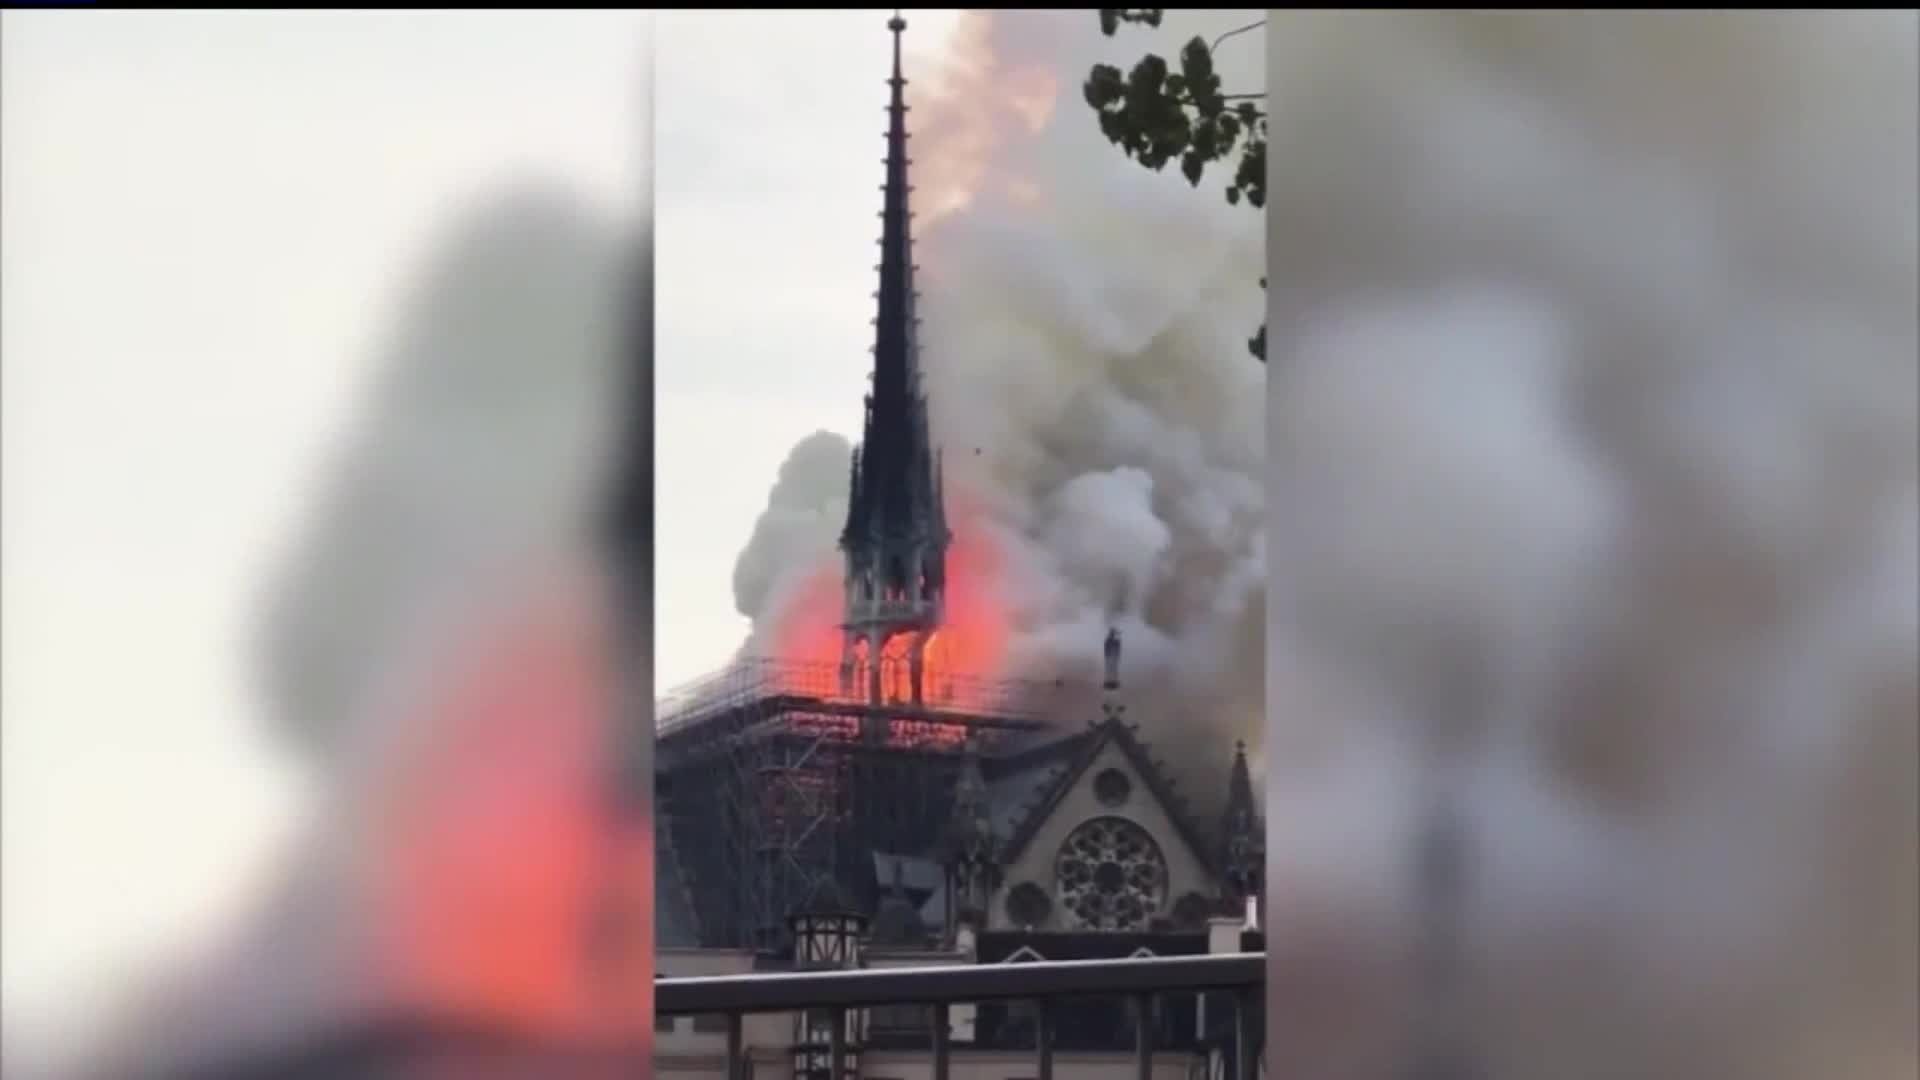 WIU Professor reflects on Notre Dame Cathedral